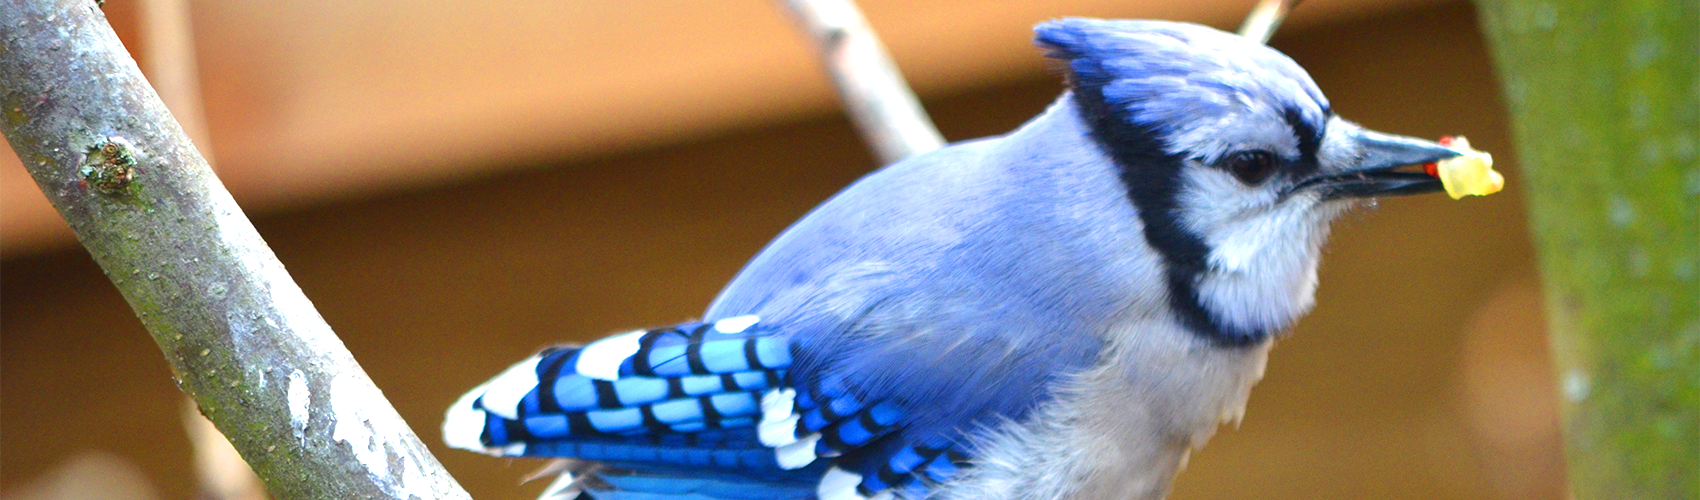 Blue jay with food in mouth